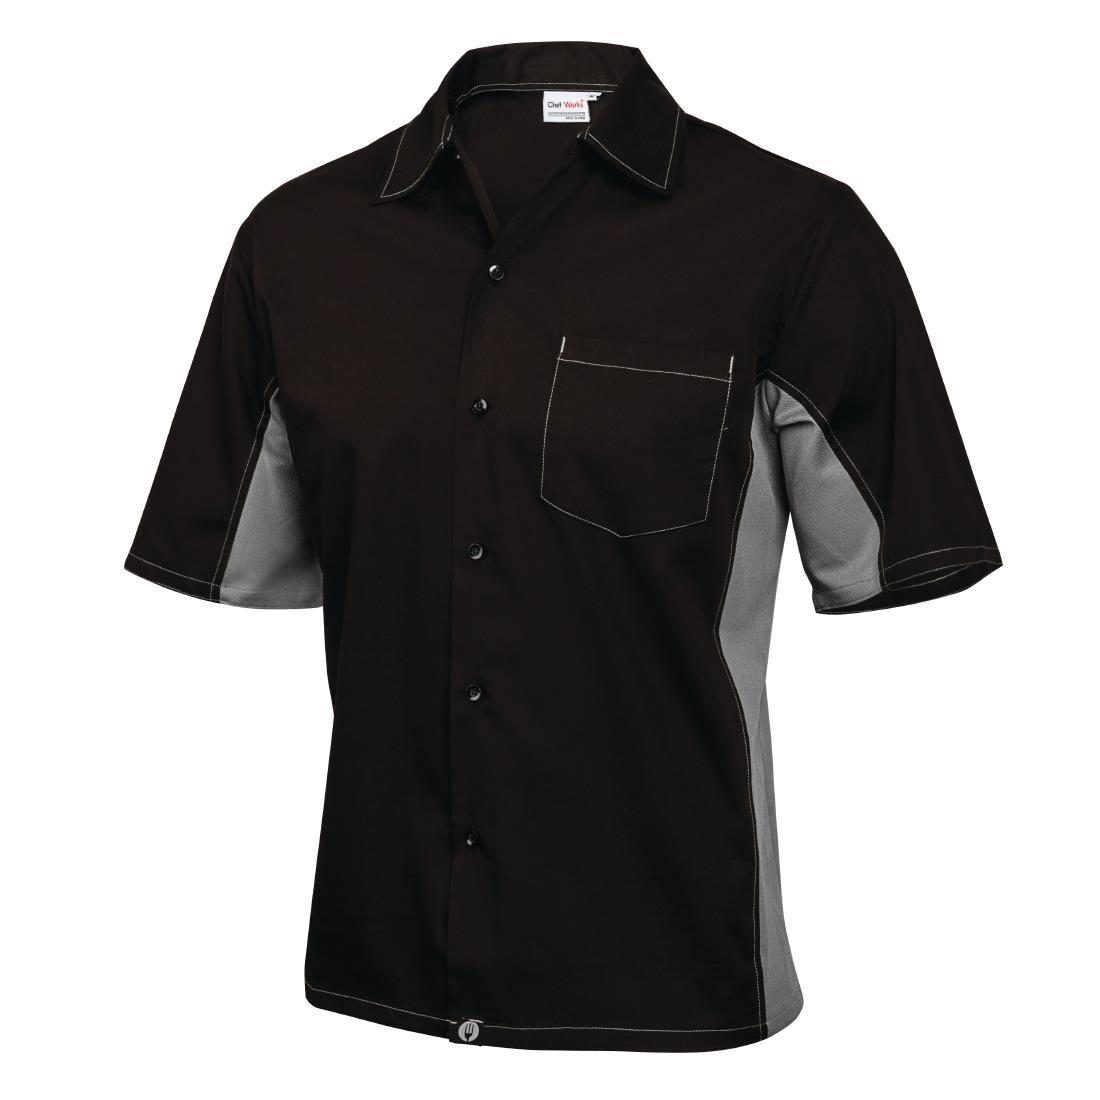 Chef Works Unisex Contrast Shirt Black and Grey L - A948-L  - 2